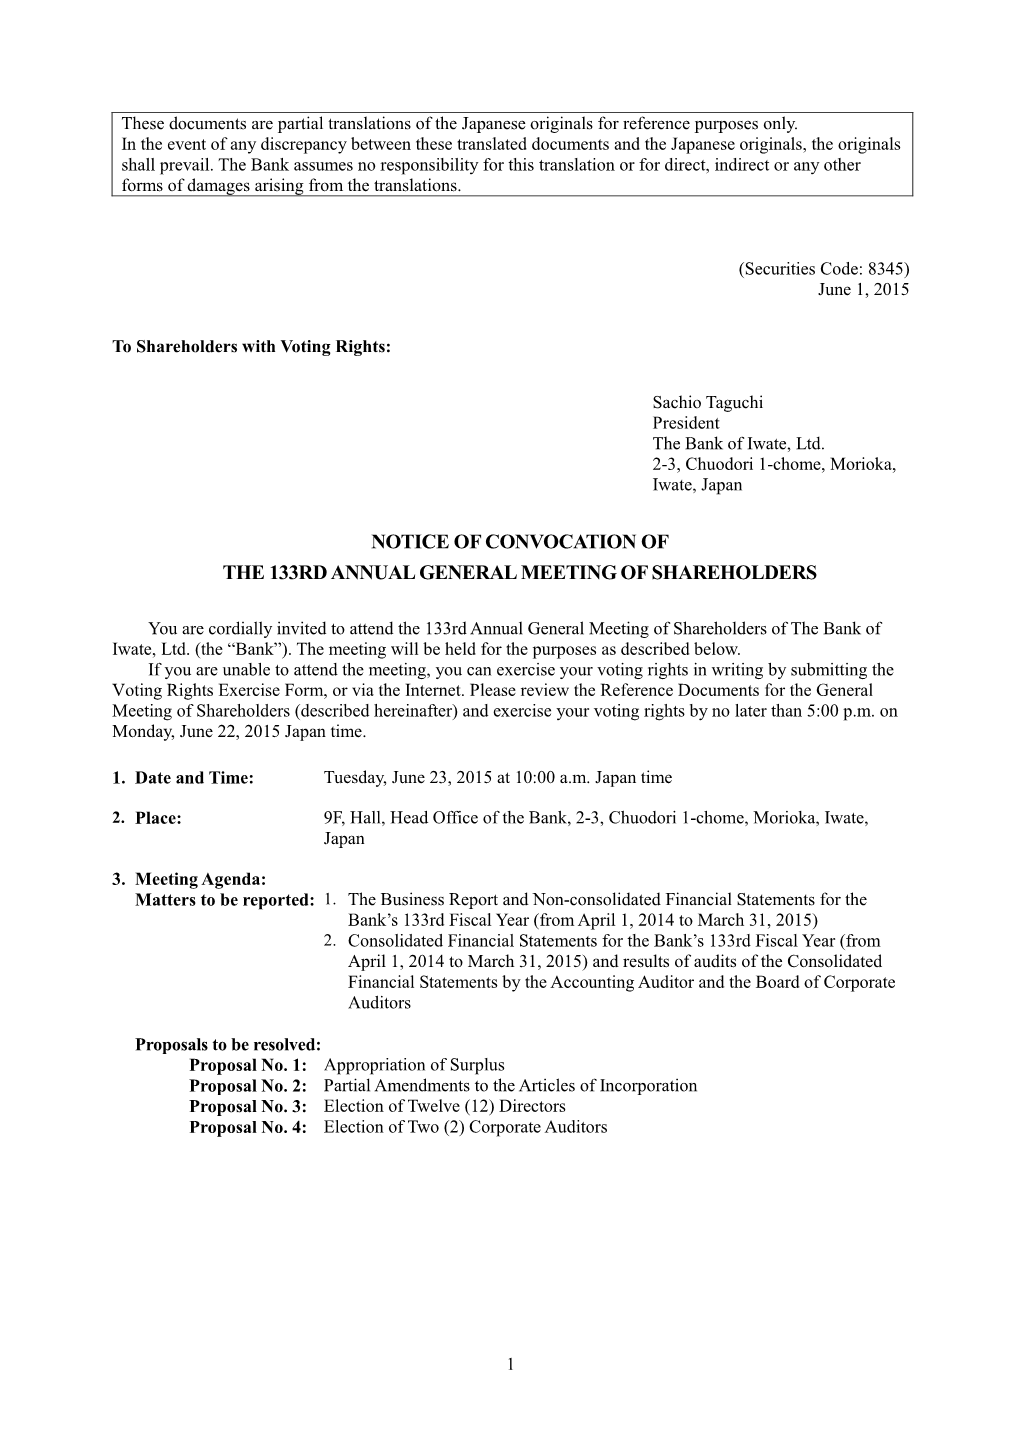 Notice of Convocation of the 133Rd Annual General Meeting of Shareholders